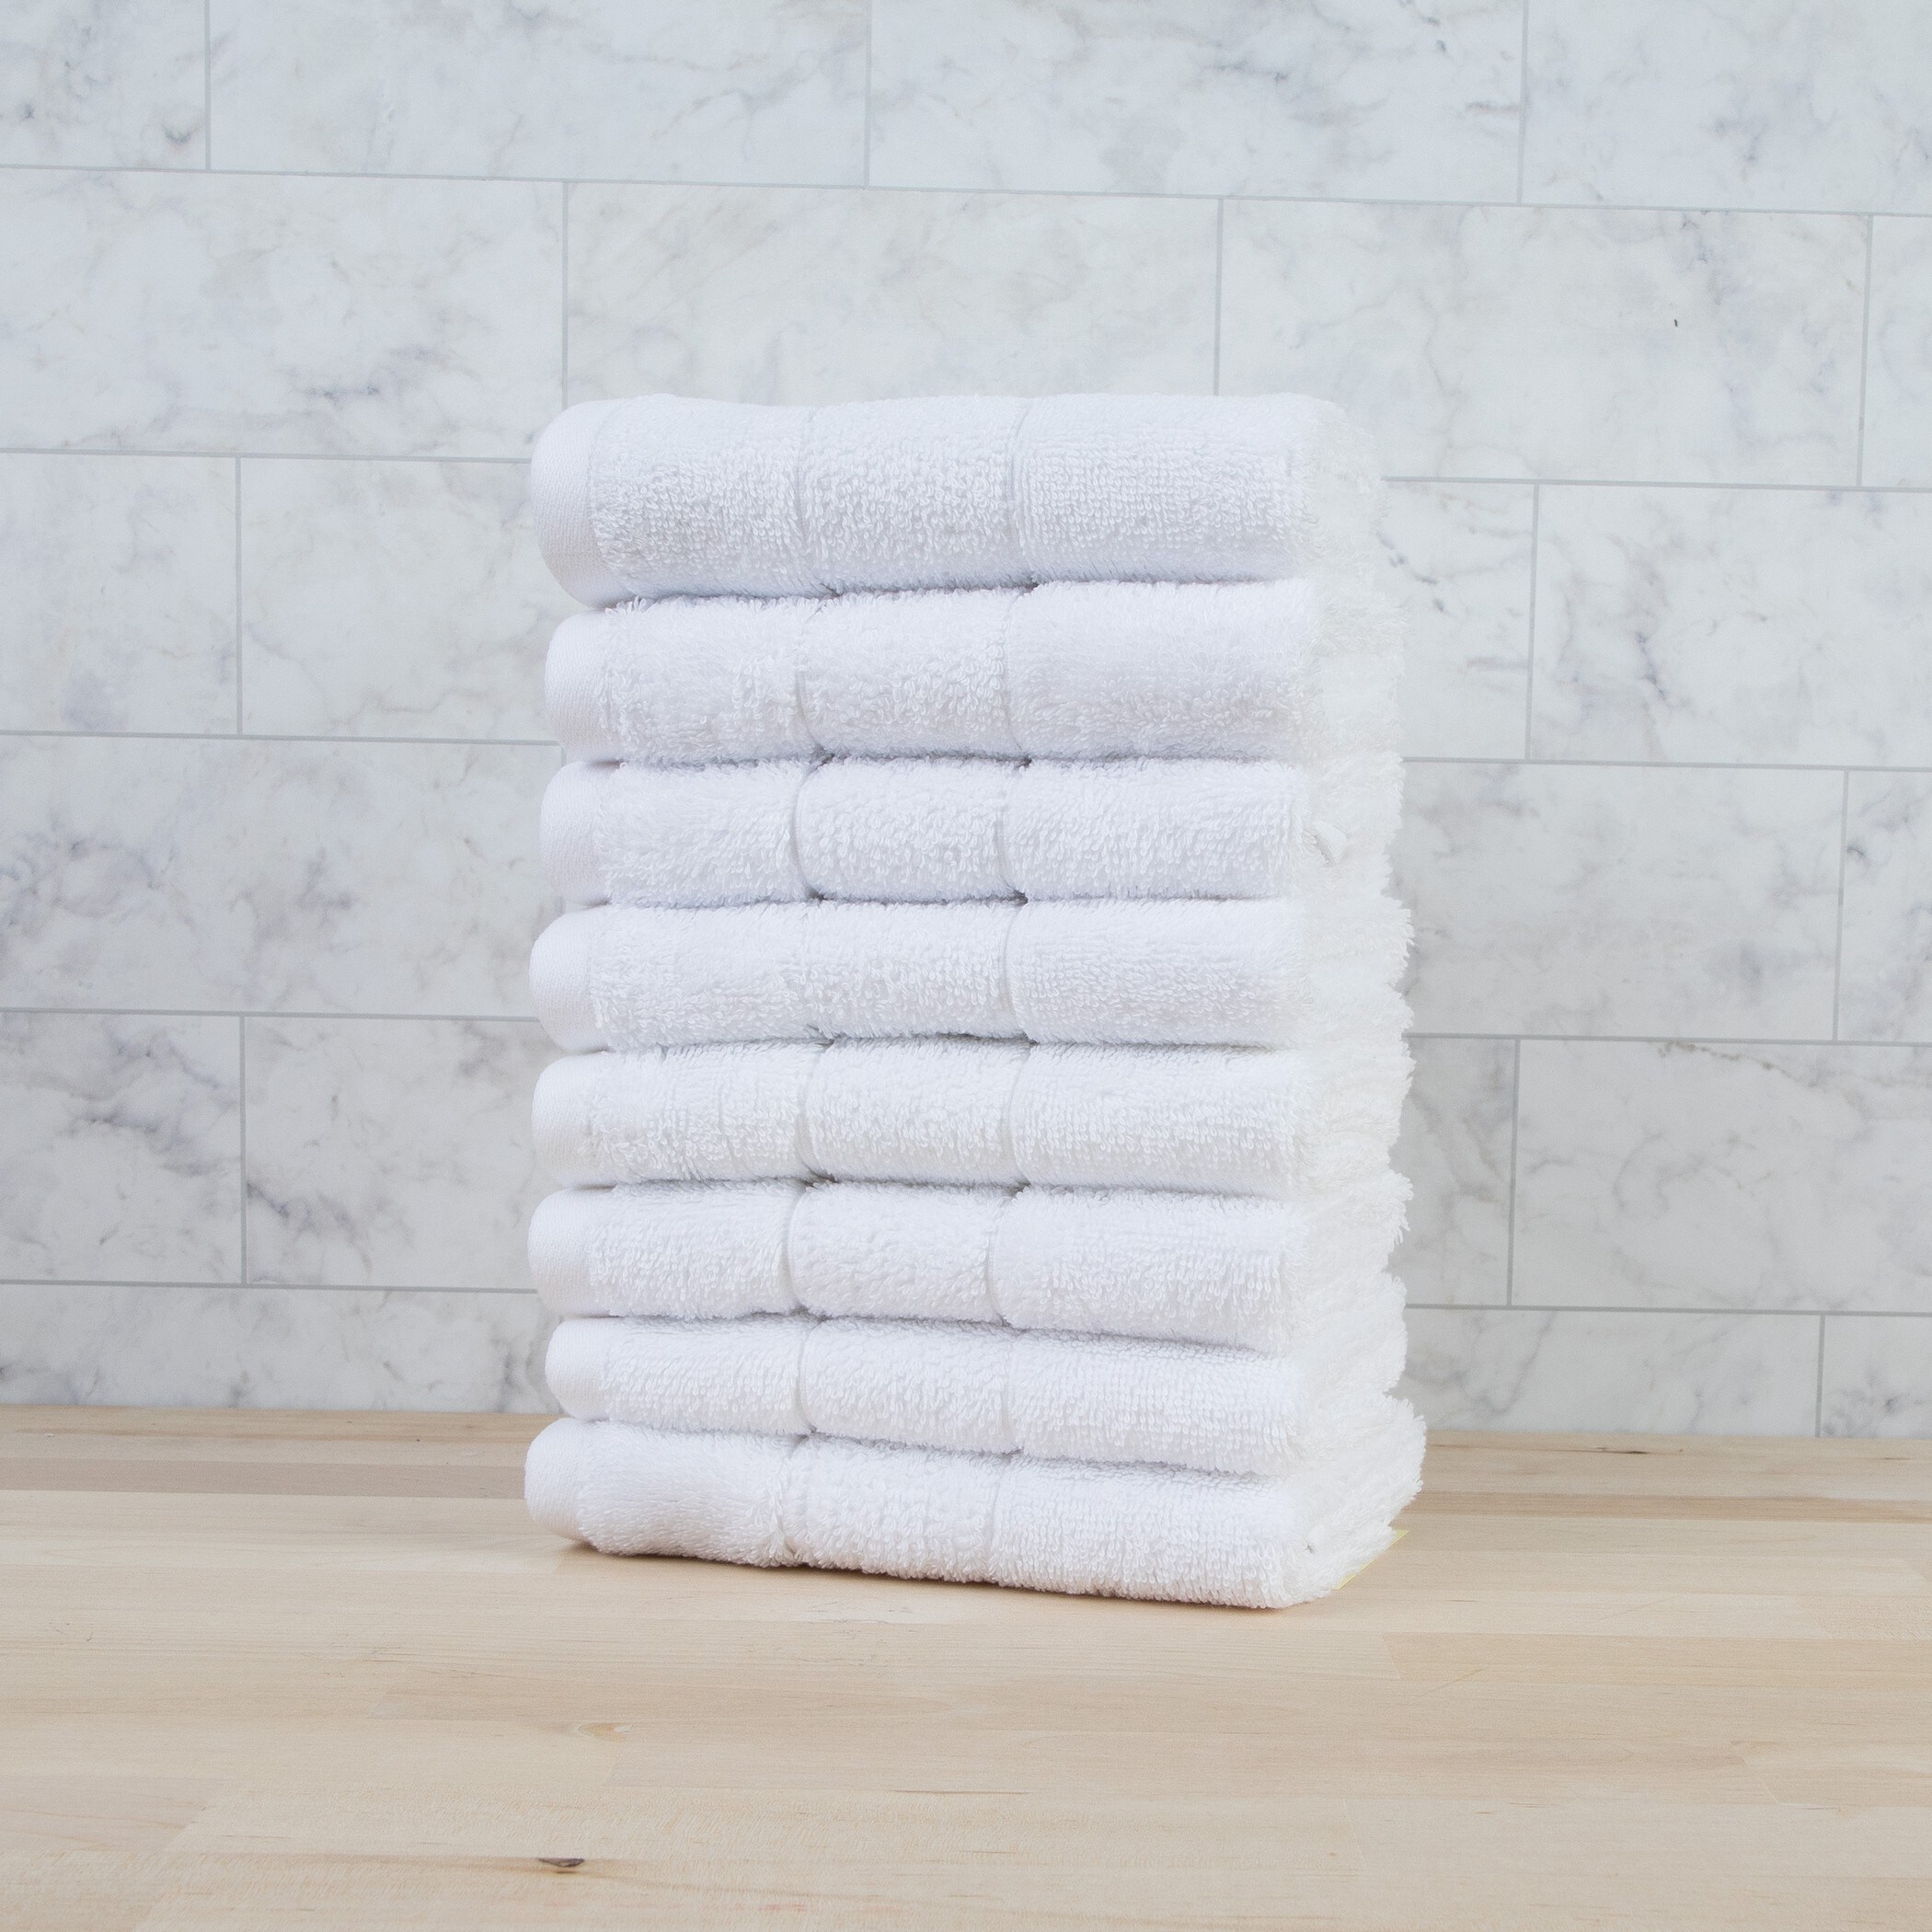 https://ak1.ostkcdn.com/images/products/is/images/direct/8f0c842eb35f1cbb26fa088764eb2648239d5d66/Aston-%26-Arden-Turkish-Solid-8-Piece-Washcloth.jpg